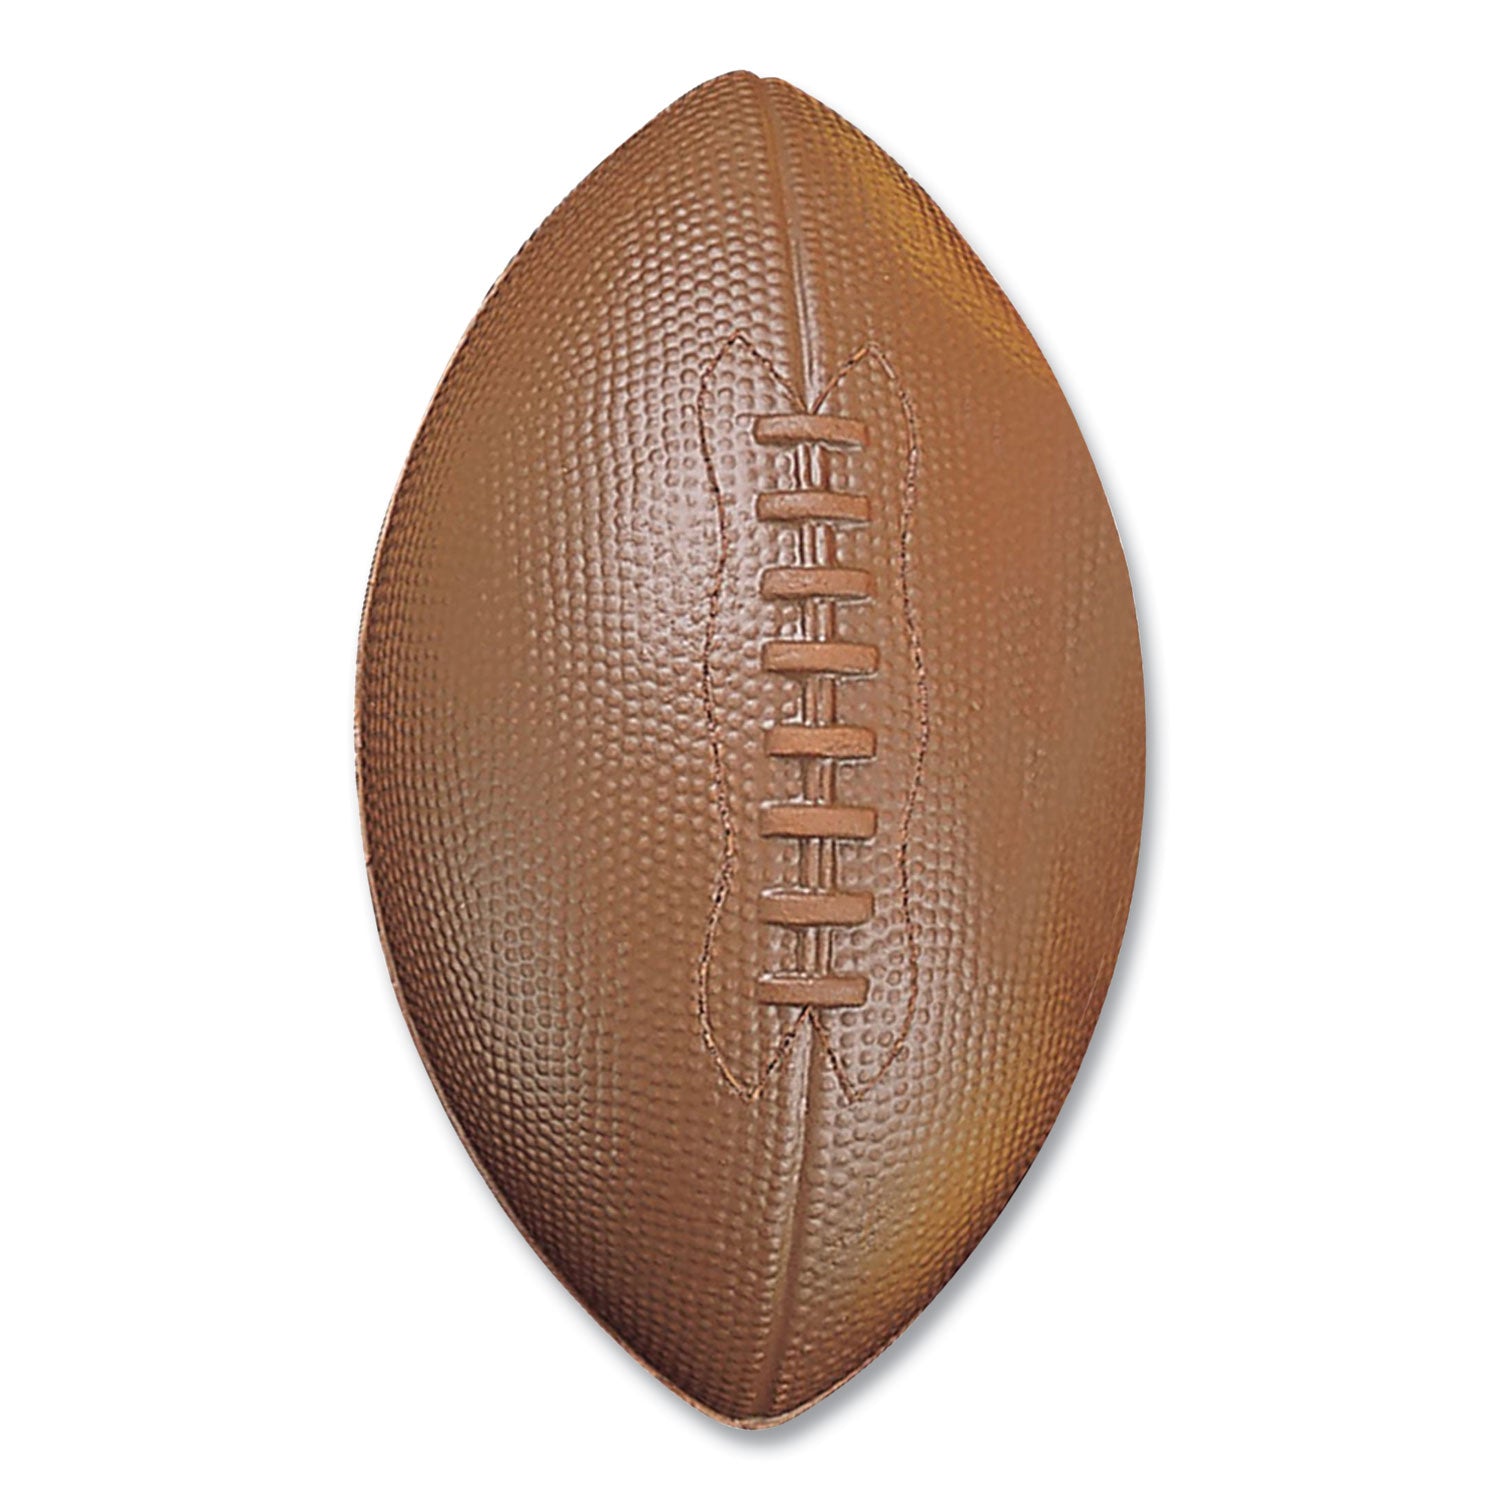 Coated Foam Sport Ball, For Football, Playground Size, Brown - 